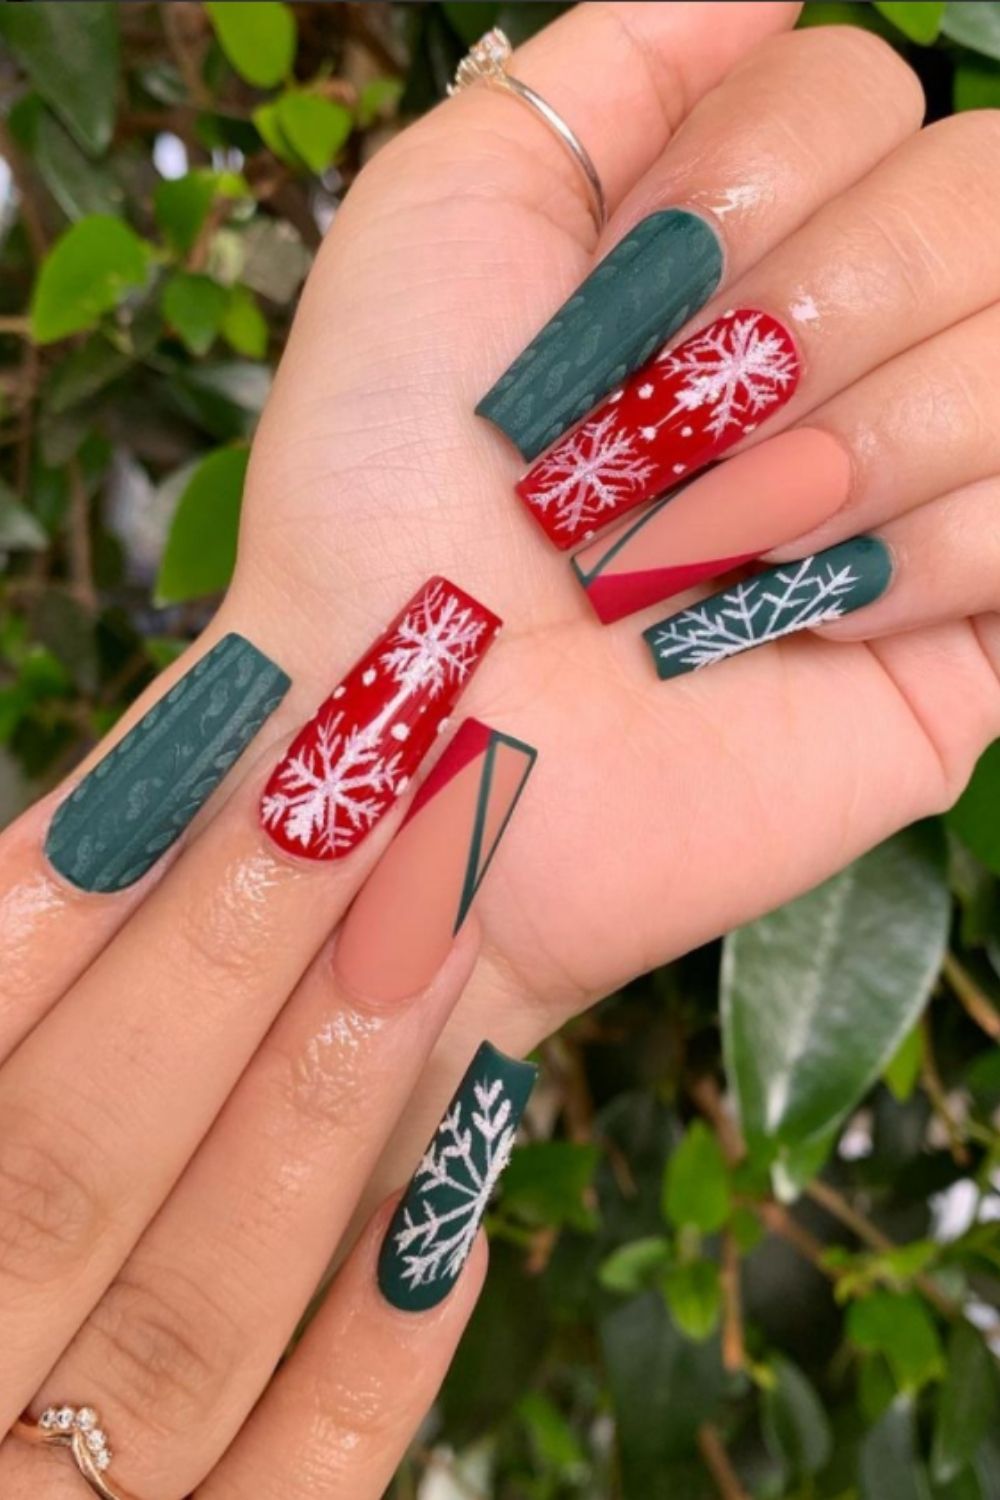 Green and red coffin nails